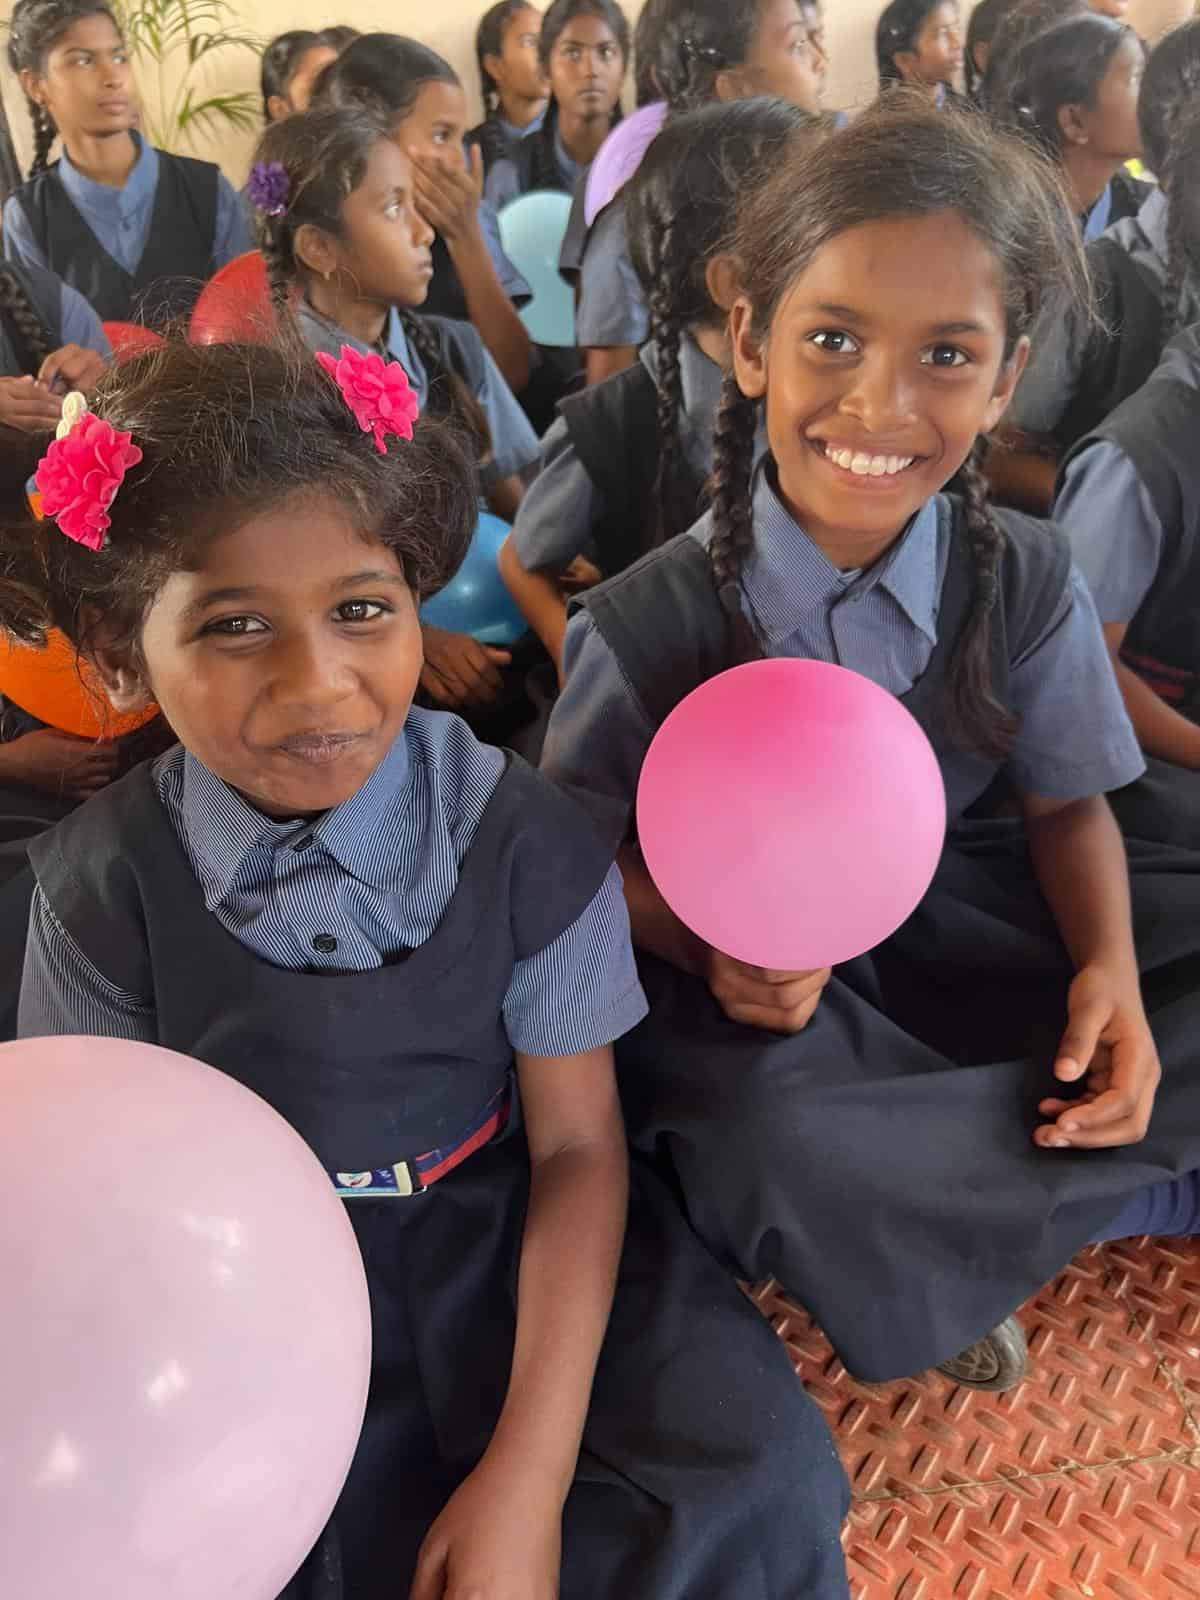 Girls with balloons at Children of Faith
